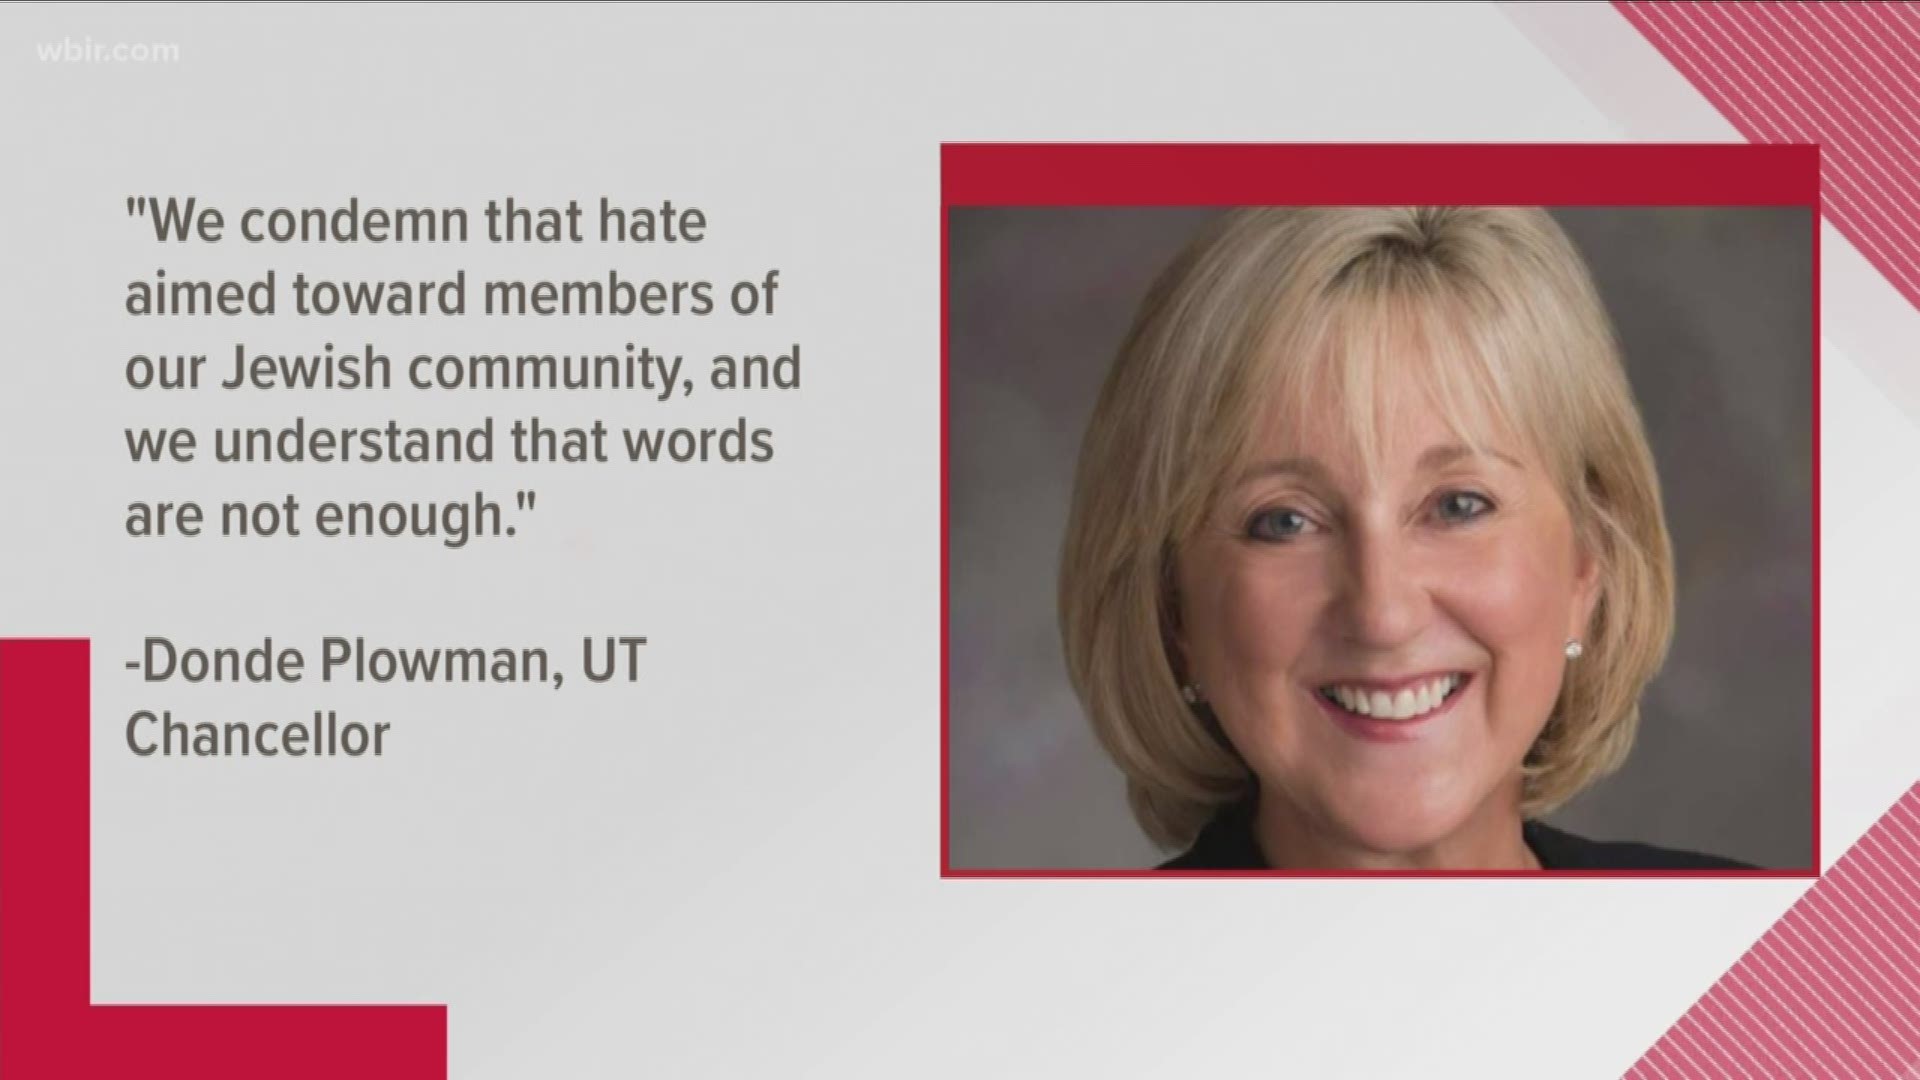 "We condemn that hate aimed toward members of our Jewish community, and we understand that words are not enough," UT's Office of the Chancellor said in a statement.